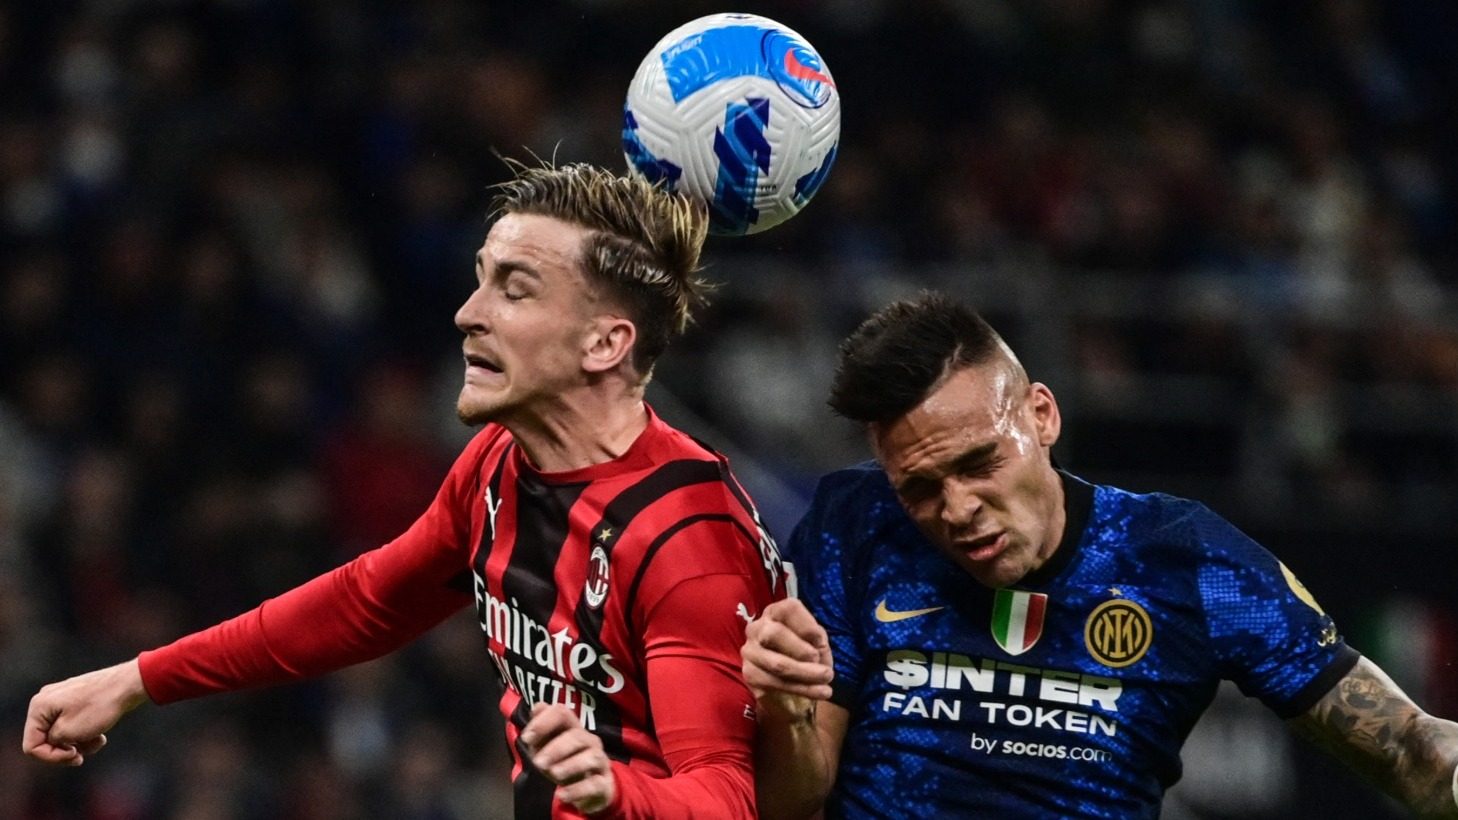 Kvalifikation Becks snesevis AC Milan vs Inter Milan: Know head-to-head record and other key stats